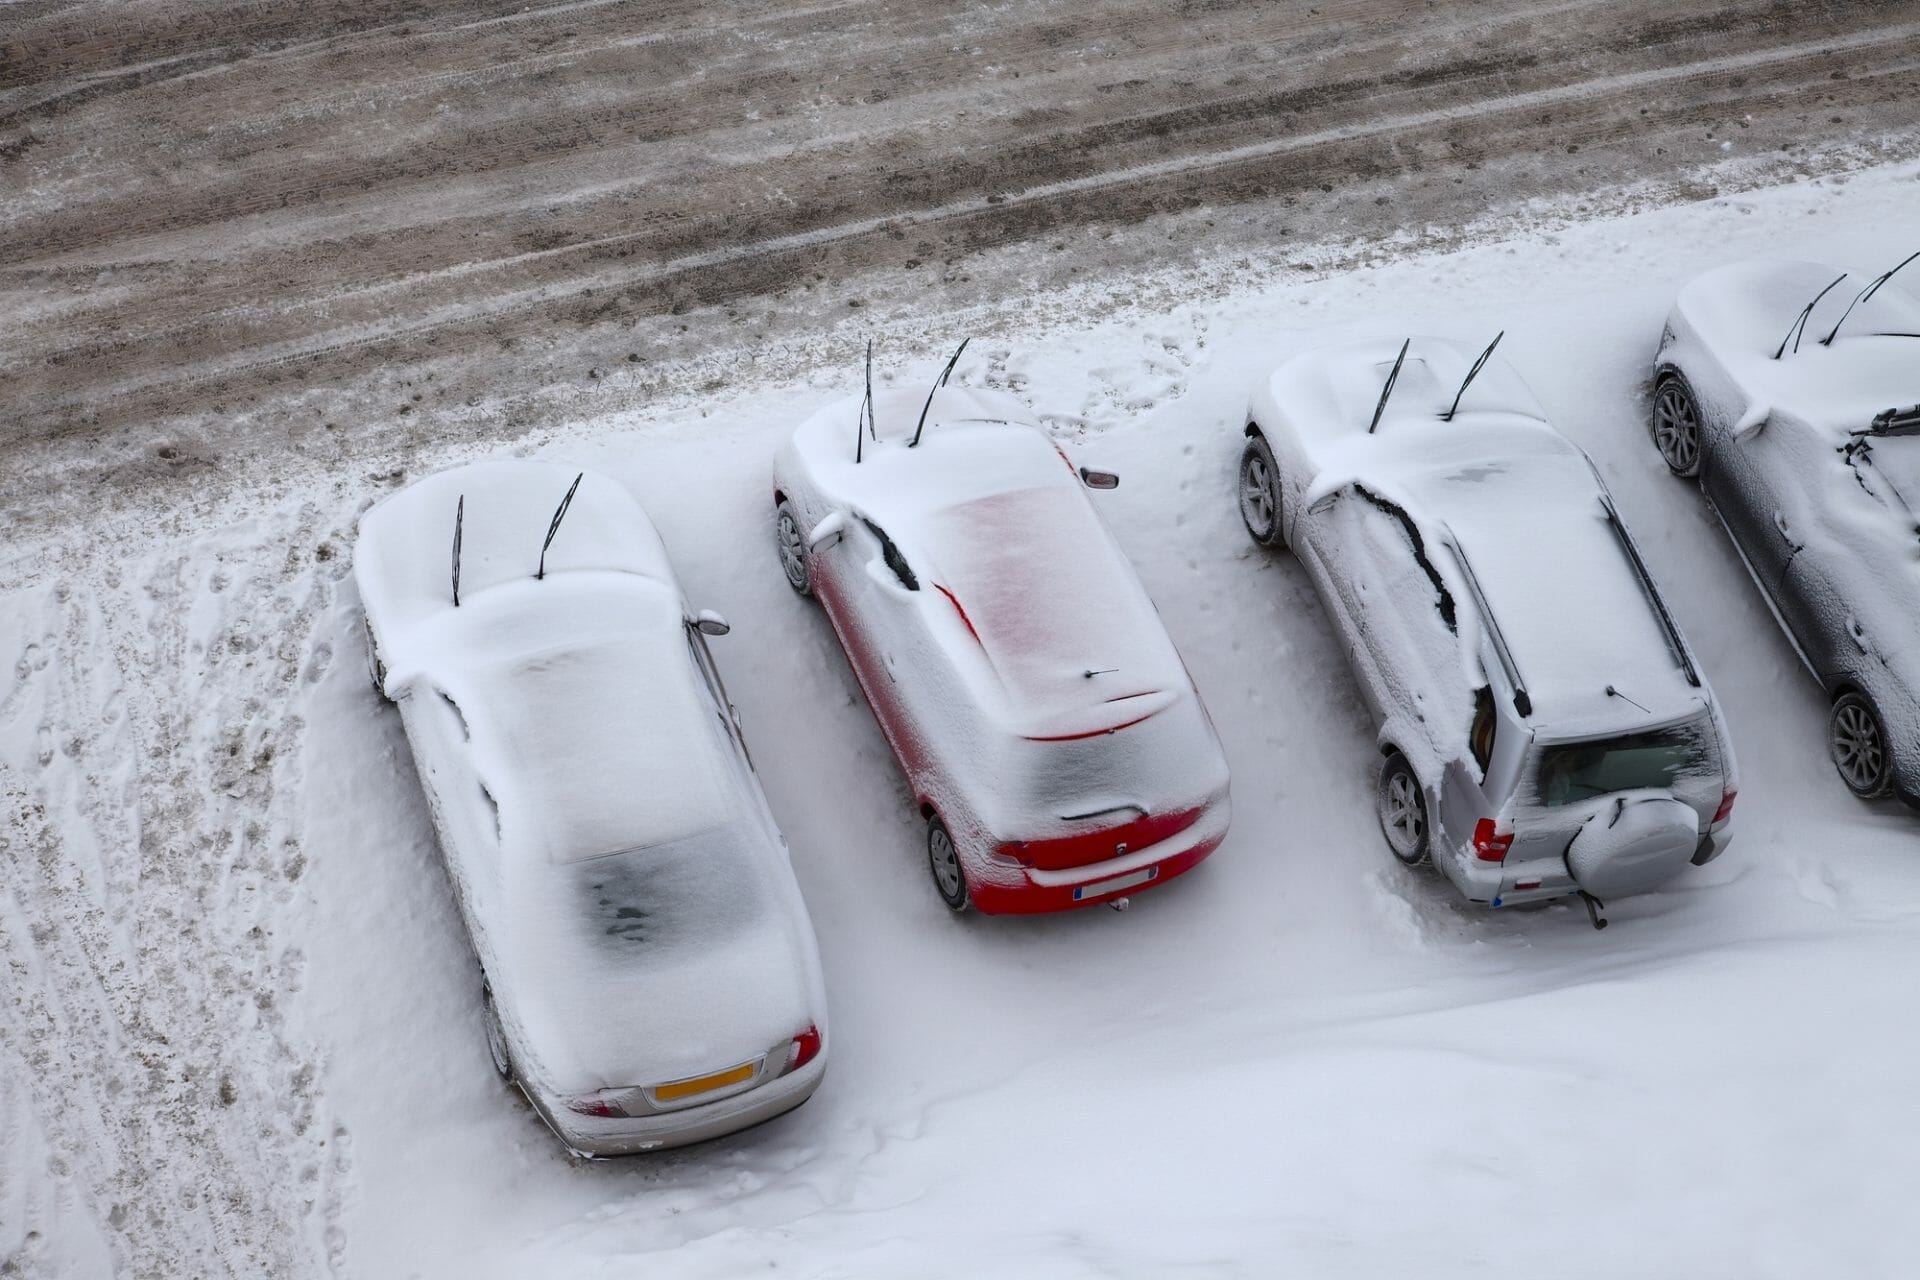 Parking Lot and cars covered in snow and ice